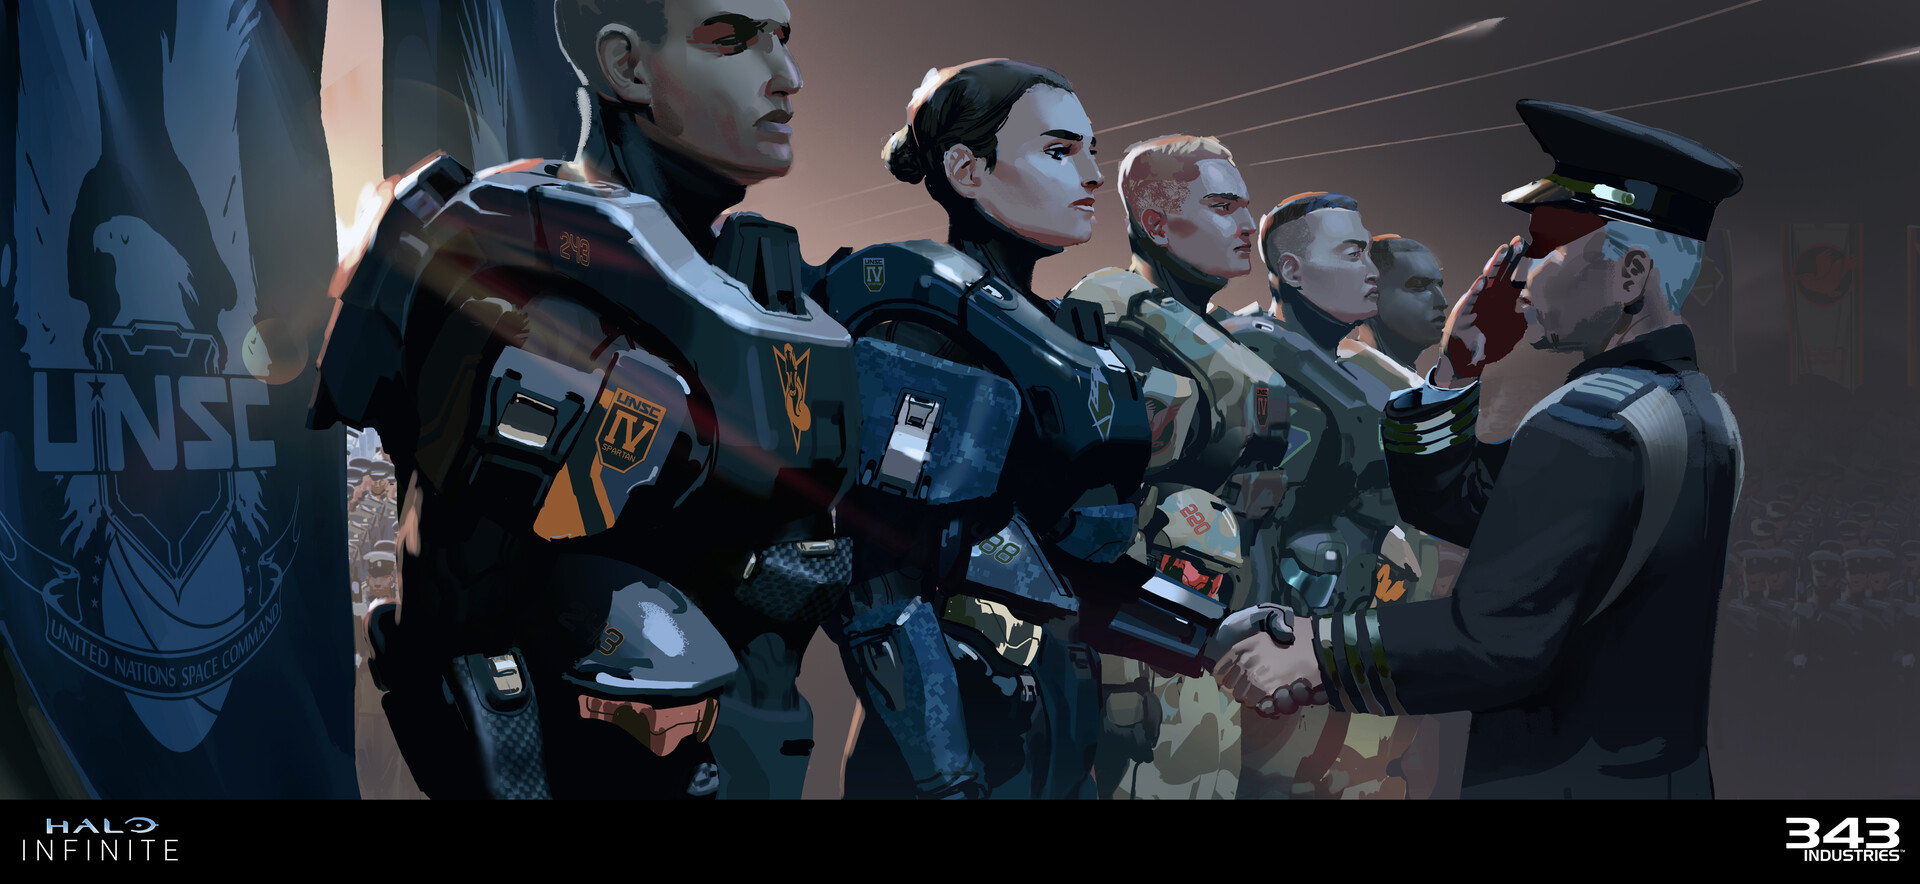 Halo Infinite concept art depicting multiple Spartans receiving awards.